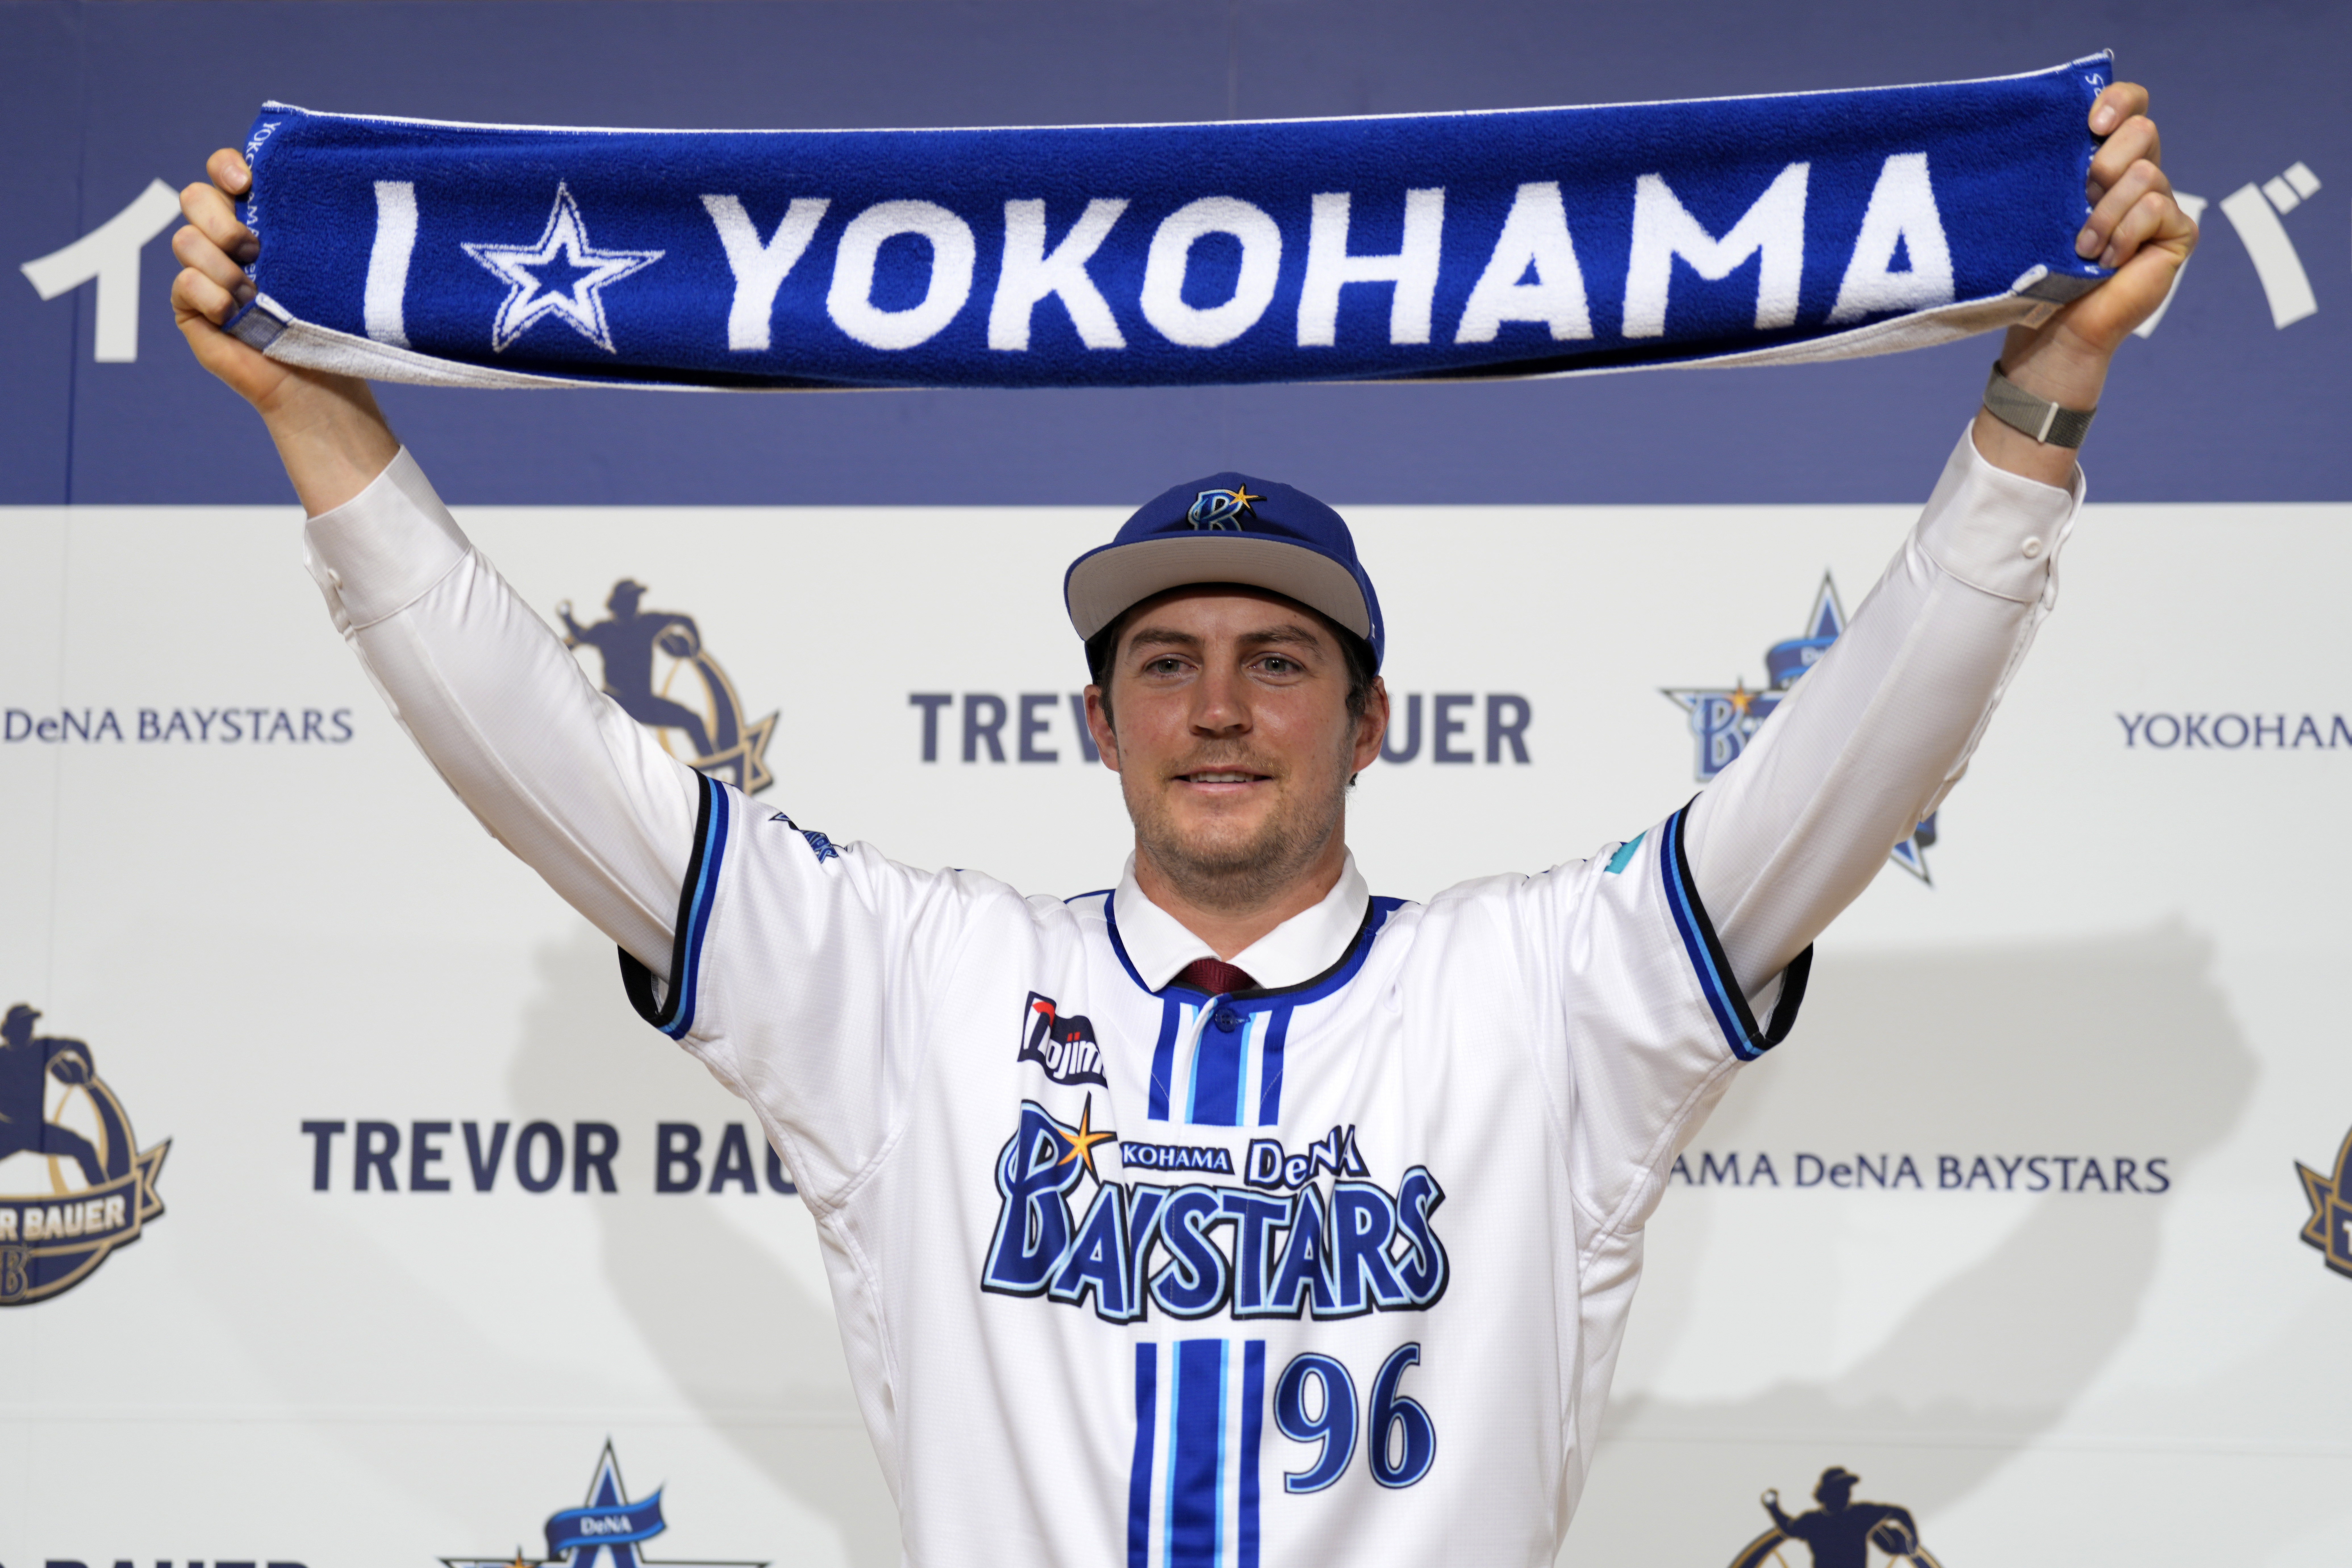 Trevor Bauer is announced by his new team in Japan after he was